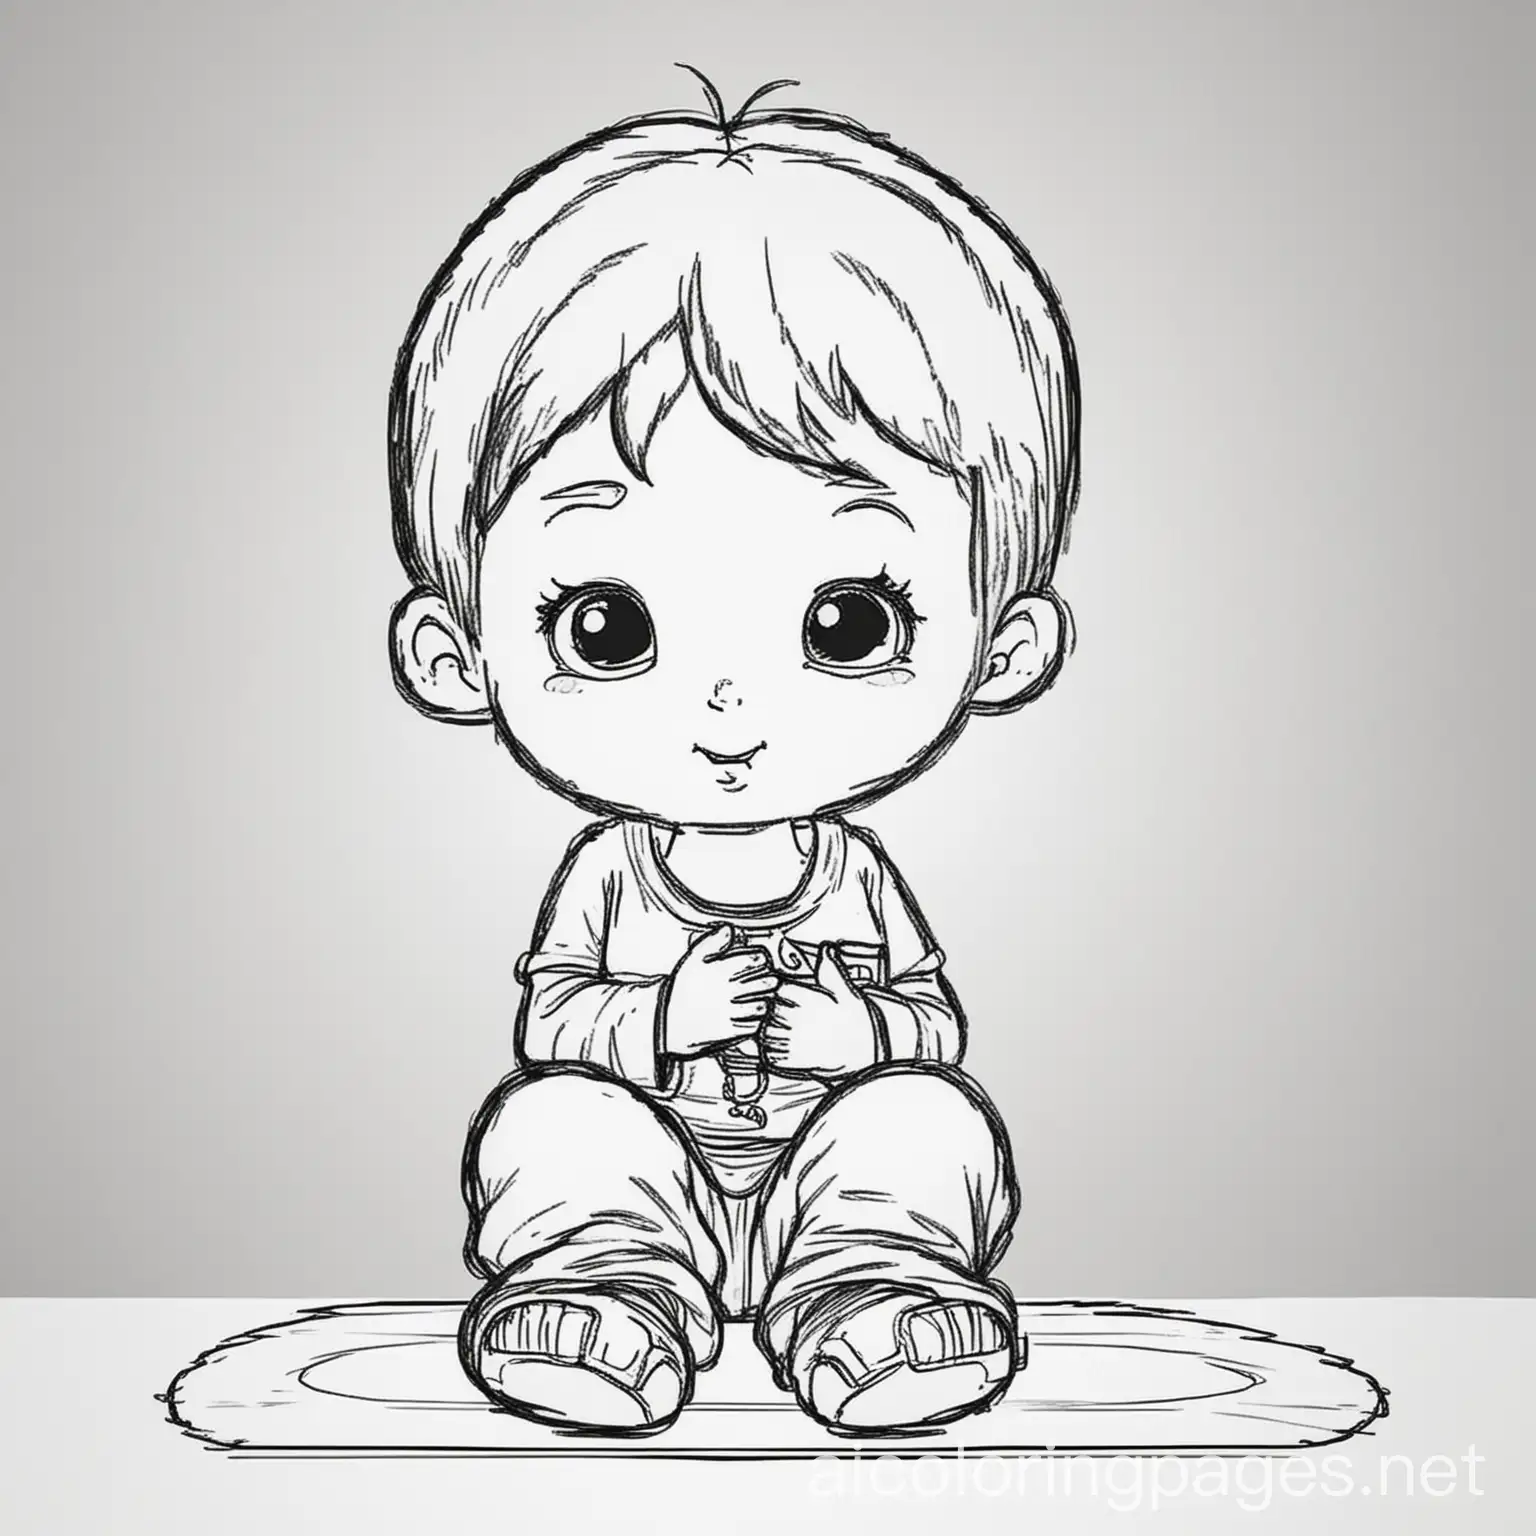 A cute actor pondering scripts and stage lights. Colouring Page, black and white, line art, white background, Simplicity, Ample White Space. The background of the colouring page is plain white to make it easy for young children to colour within the lines.  The outlines of all the subjects are easy to distinguish, making it simple for kids to colour without too much difficulty ,, Coloring Page, black and white, line art, white background, Simplicity, Ample White Space. The background of the coloring page is plain white to make it easy for young children to color within the lines. The outlines of all the subjects are easy to distinguish, making it simple for kids to color without too much difficulty